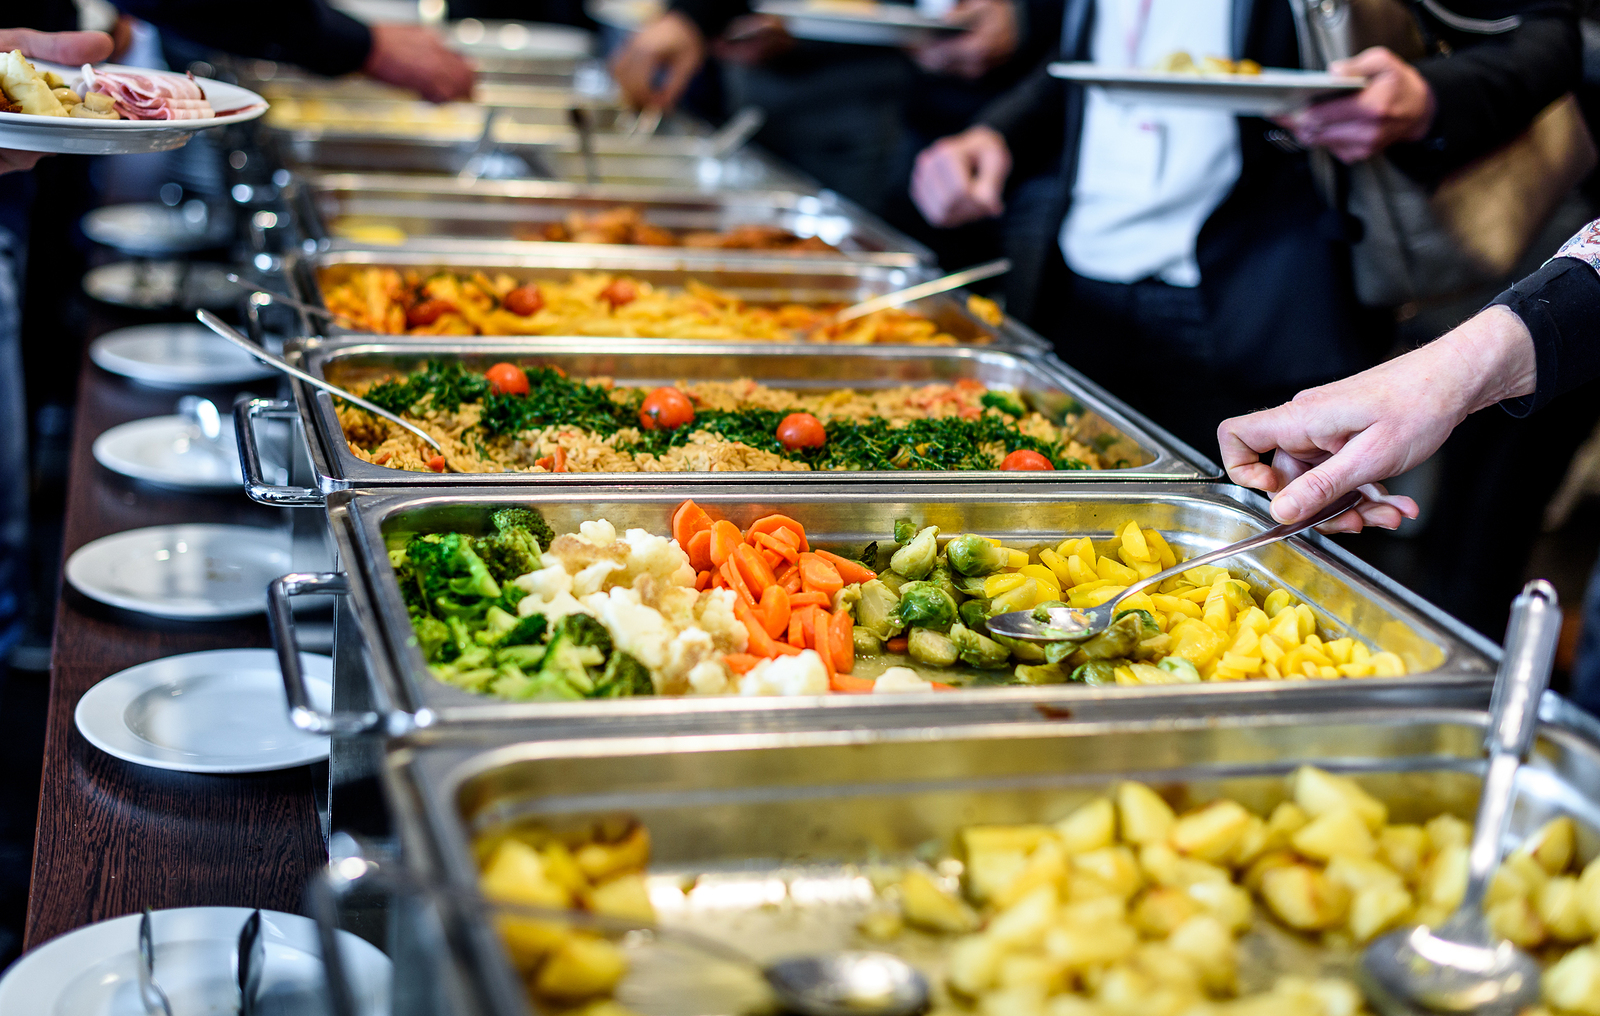 Double Down on Casino Food Waste Reduction with Smart Equipment